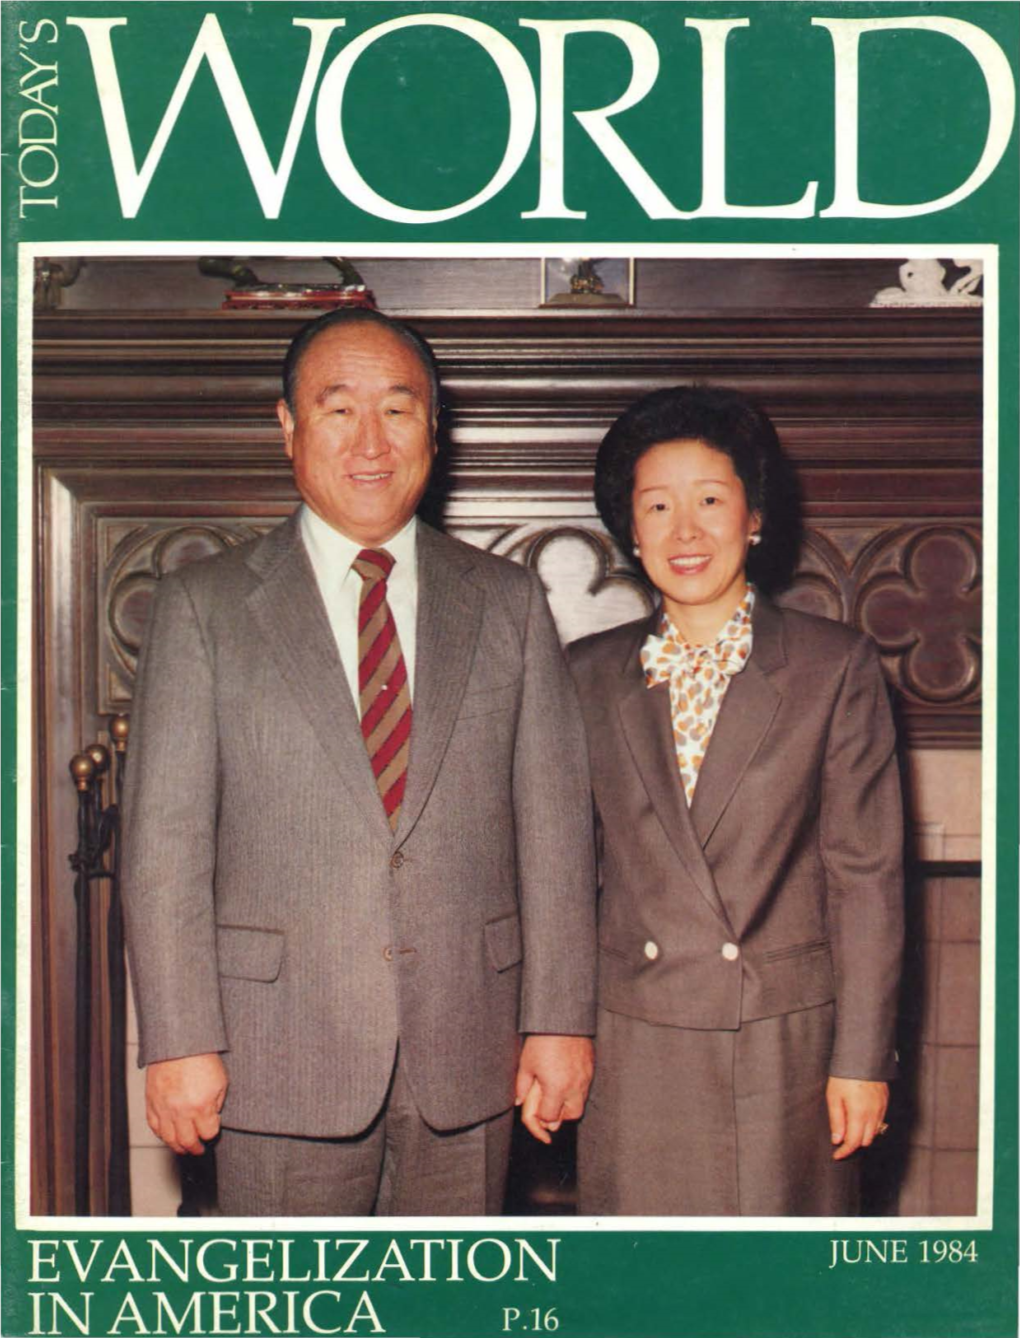 Today's World Magazine for June 1984